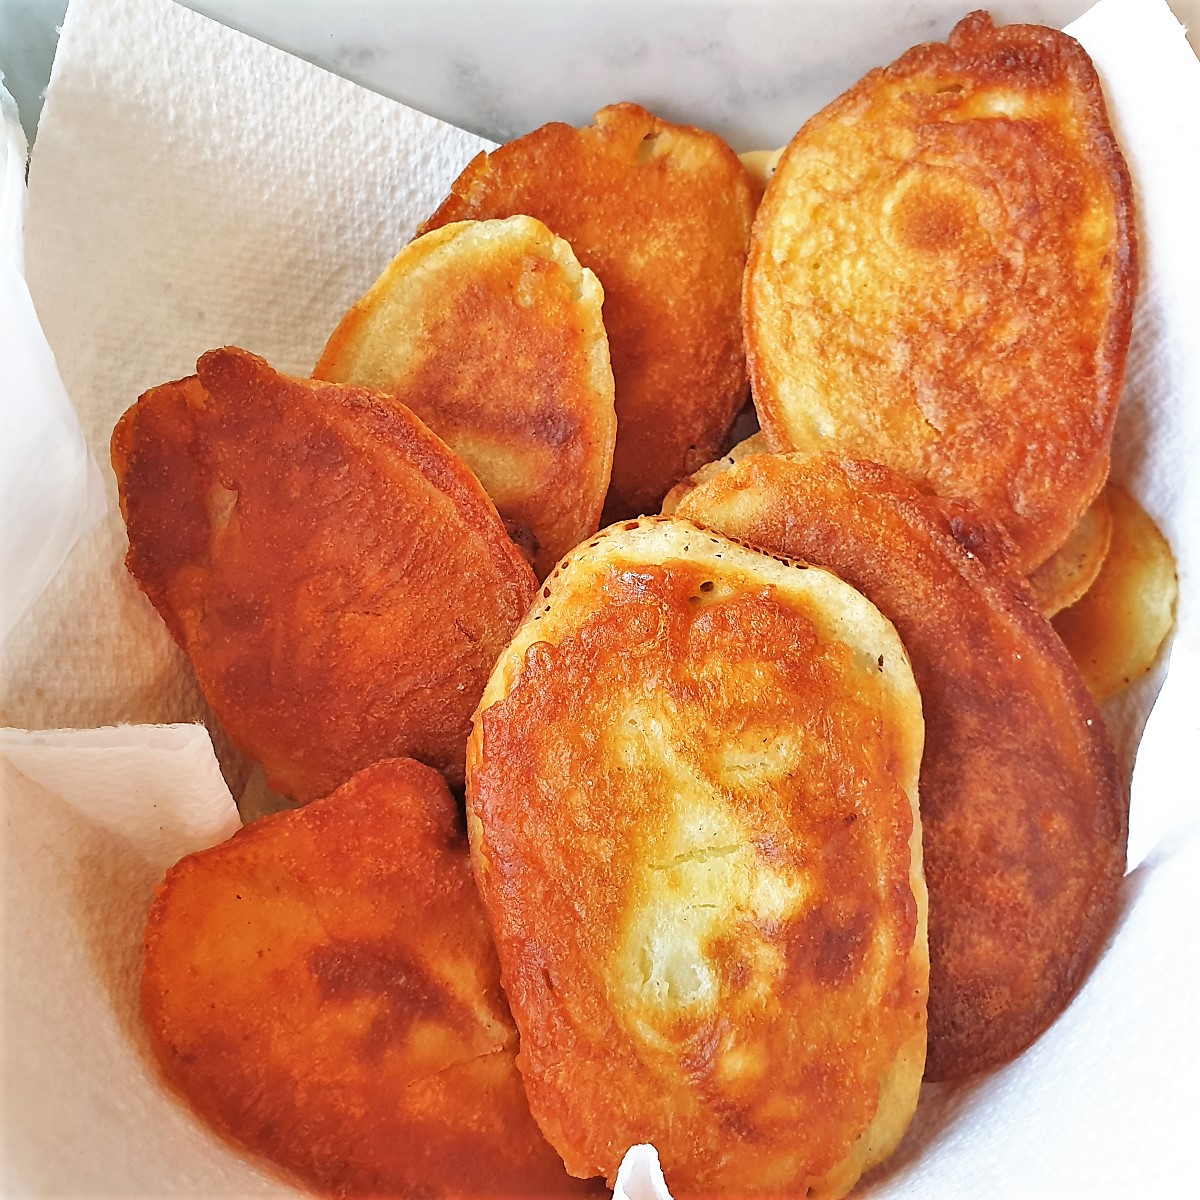 A dish of fried scalloped potatoes in batter.